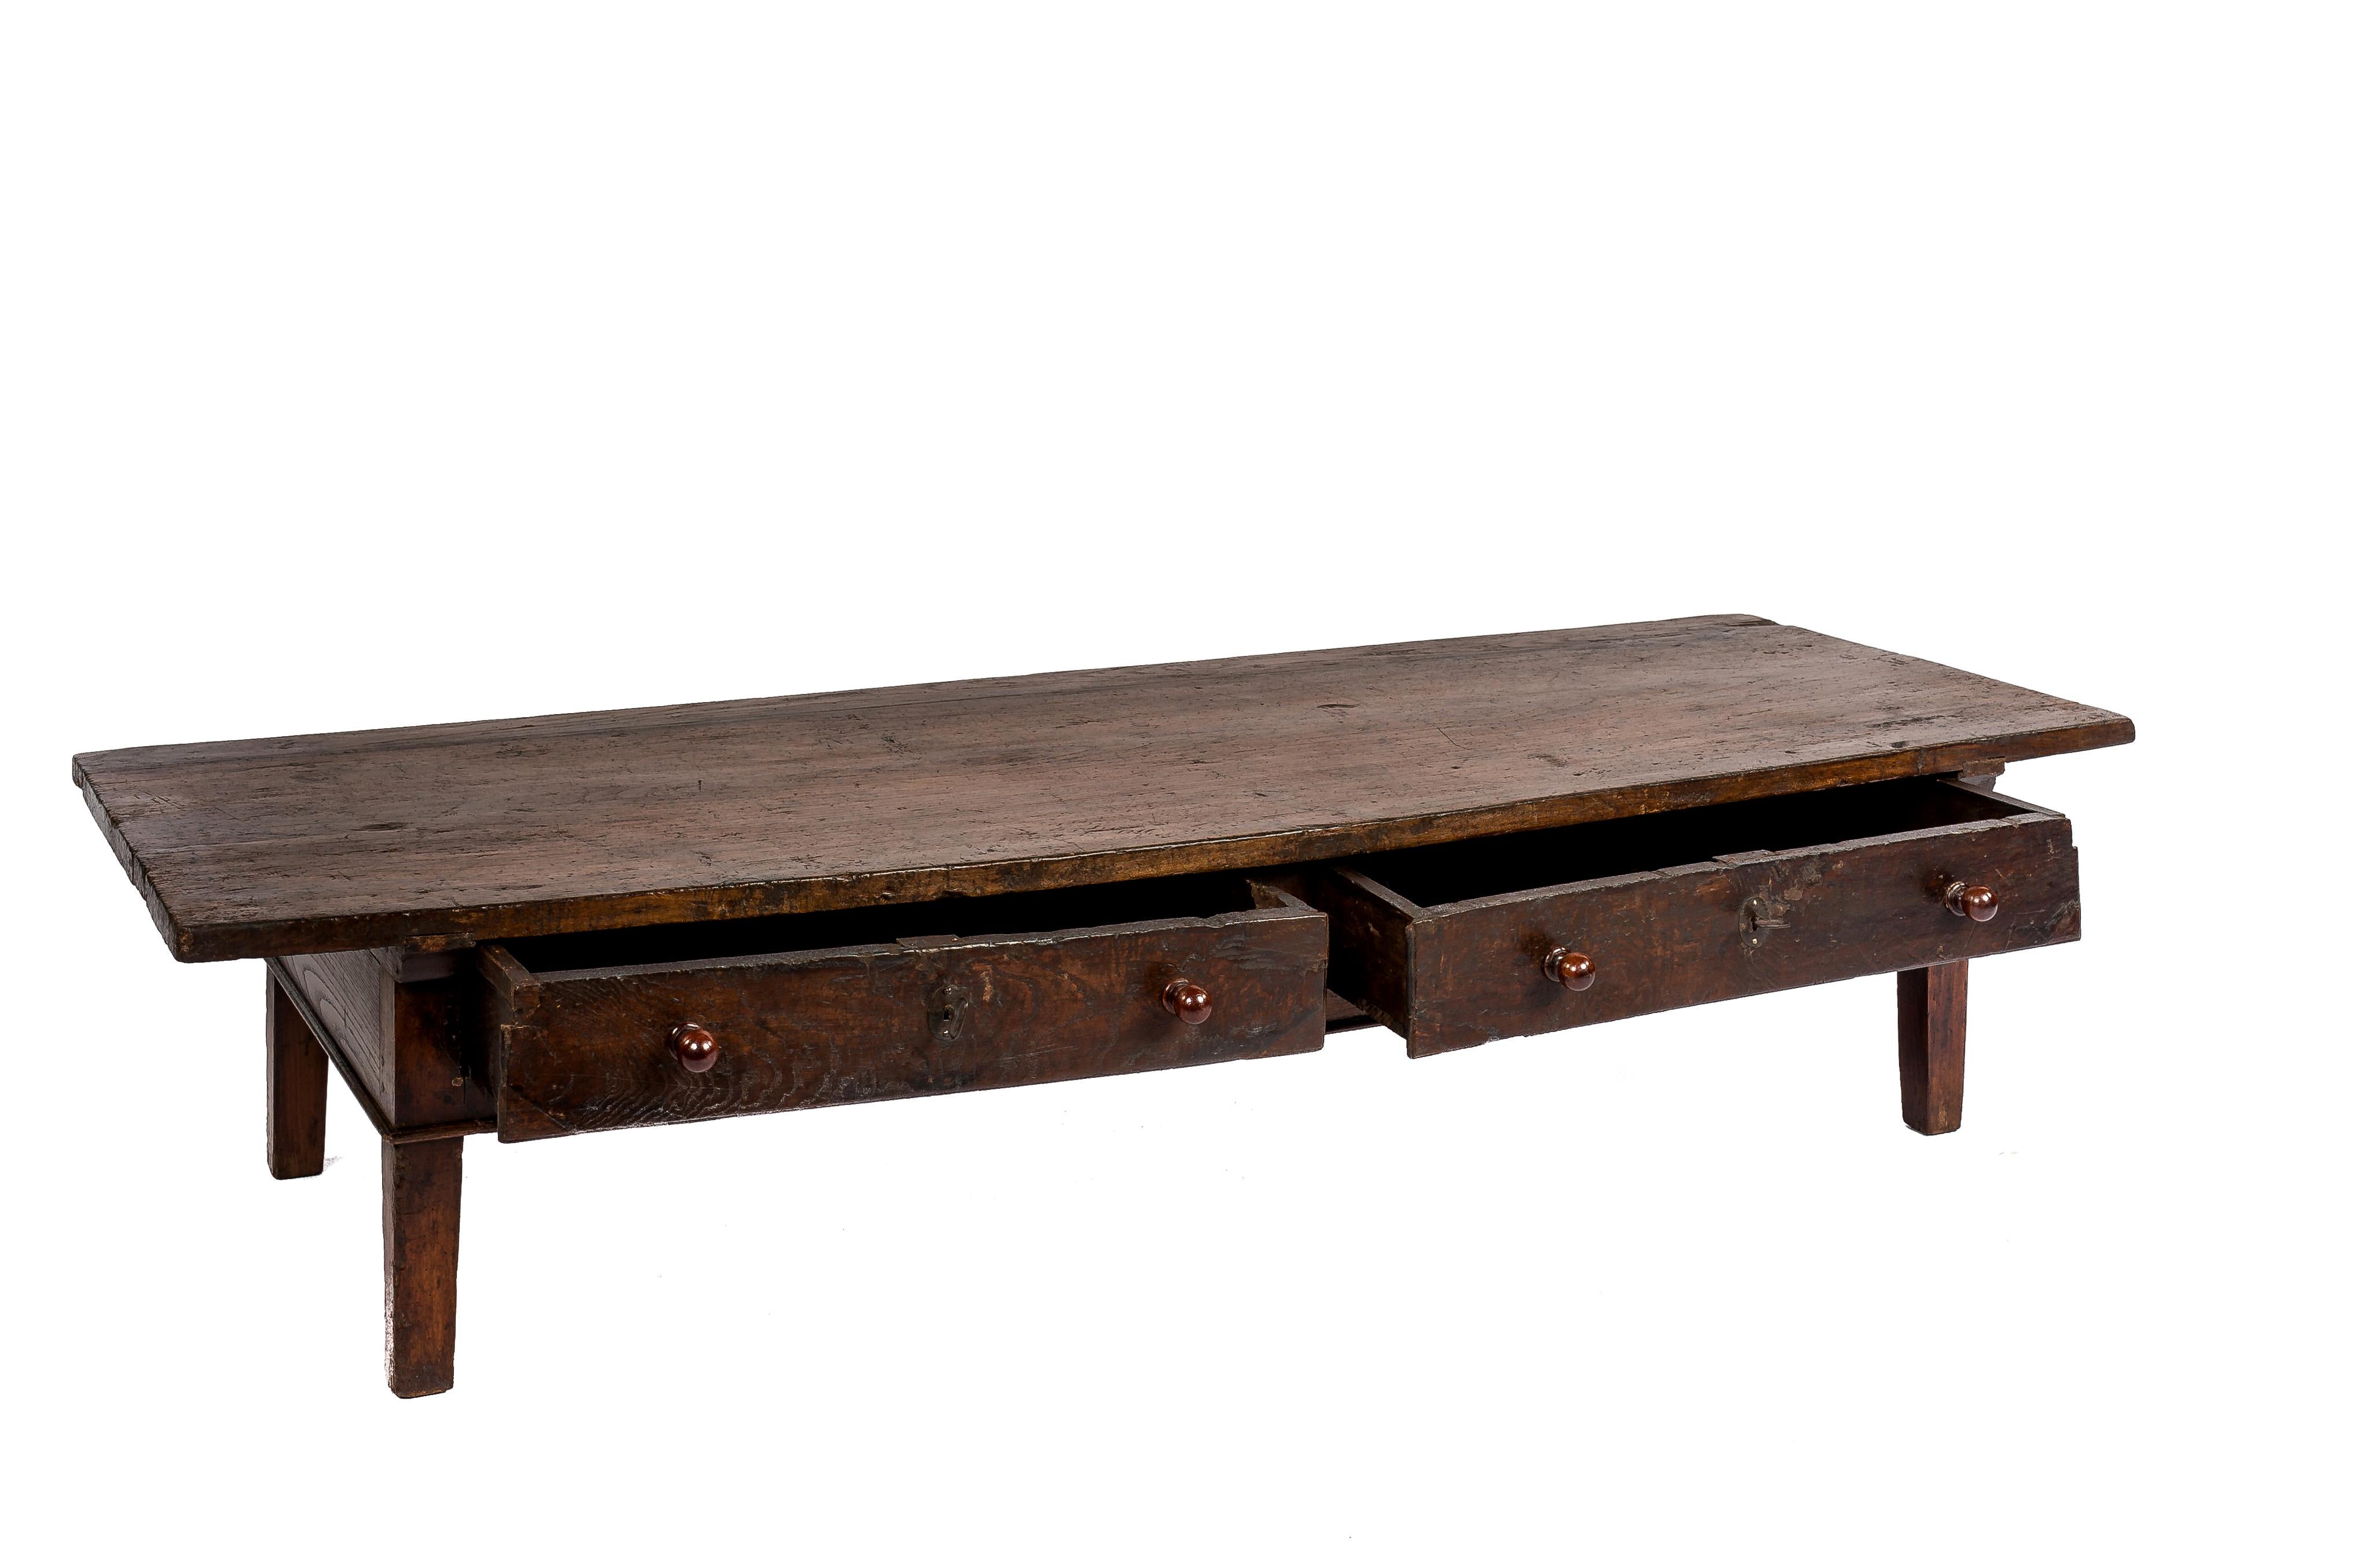 Steel Antique Late 18th-Century Rustic Spanish Warm Brown Chestnut Coffee Table